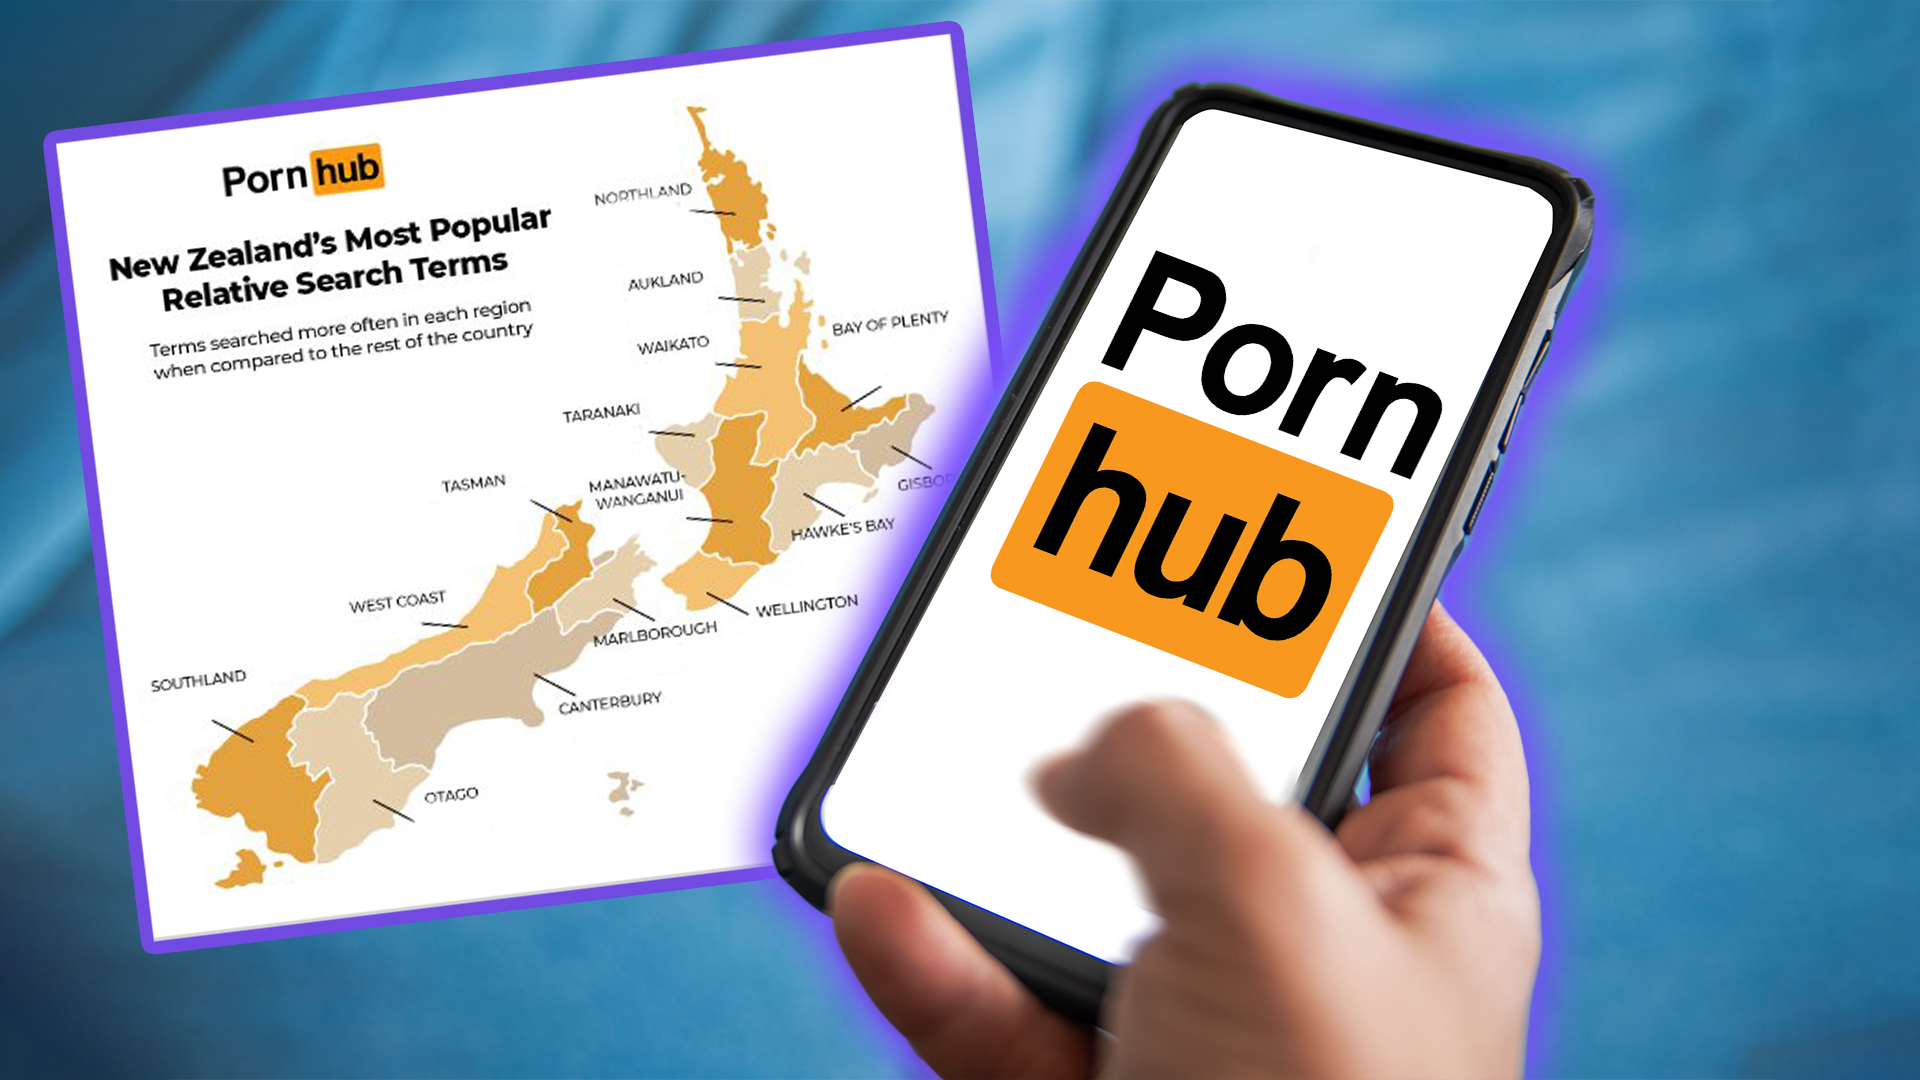 PornHub has let slip each NZs region most popular search terms and some of yall are freaky